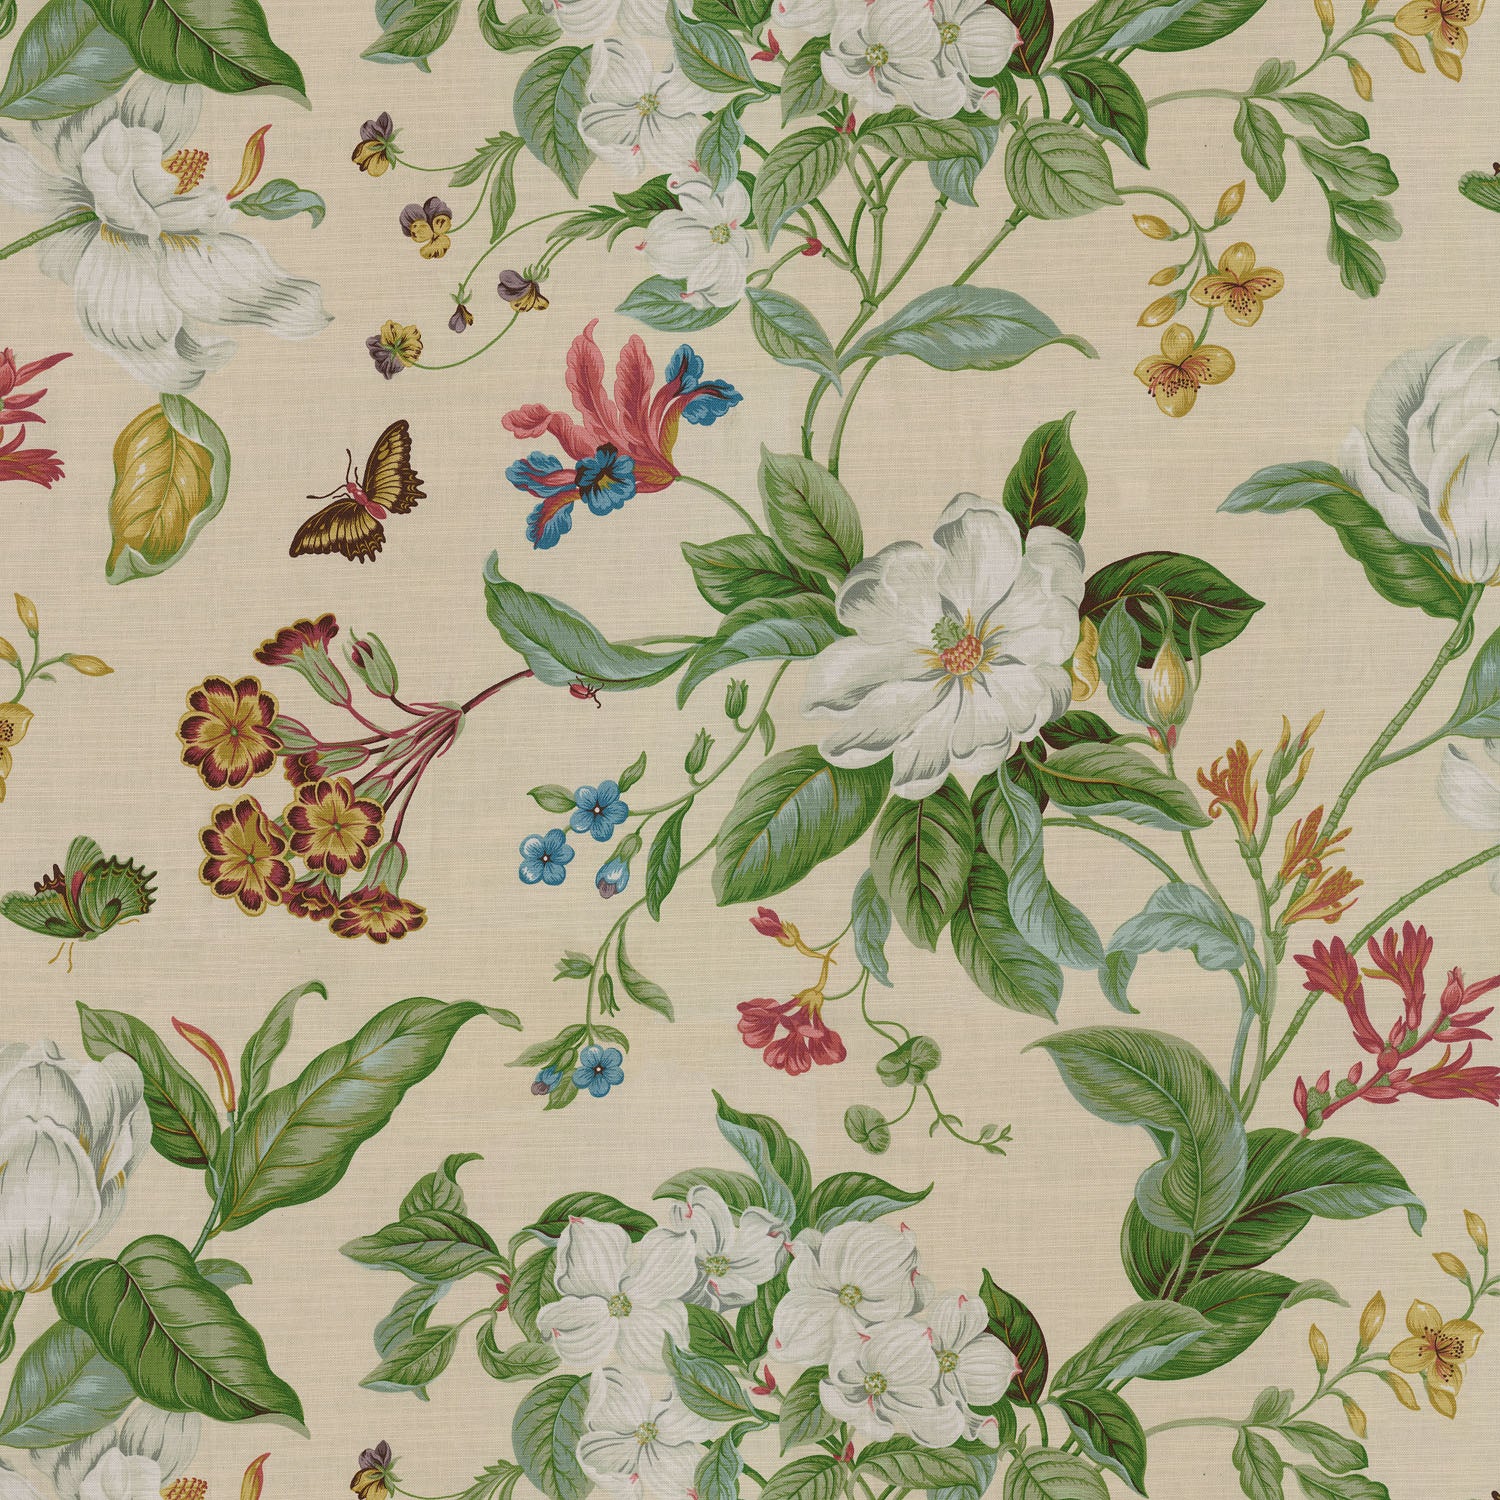 Garden Toile - Floral Fabric By The Yard